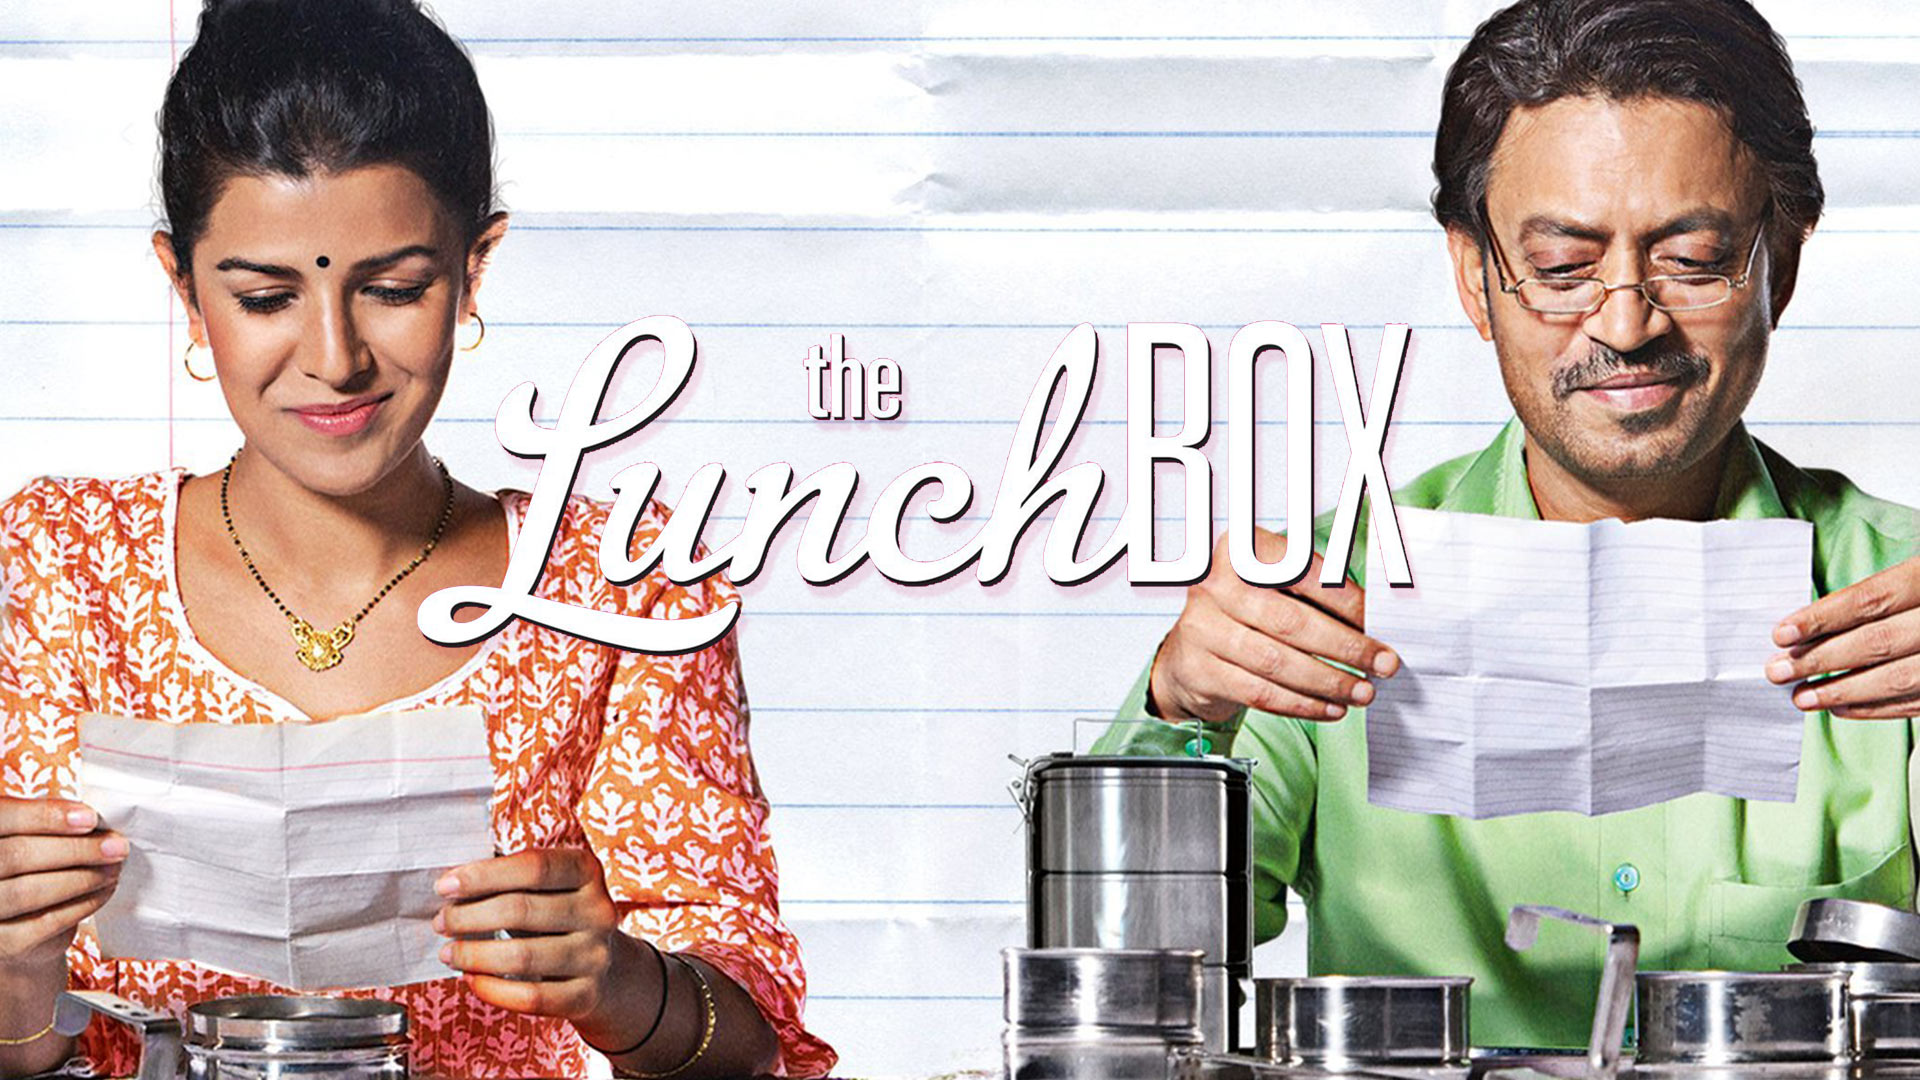 The Lunchbox (2013)